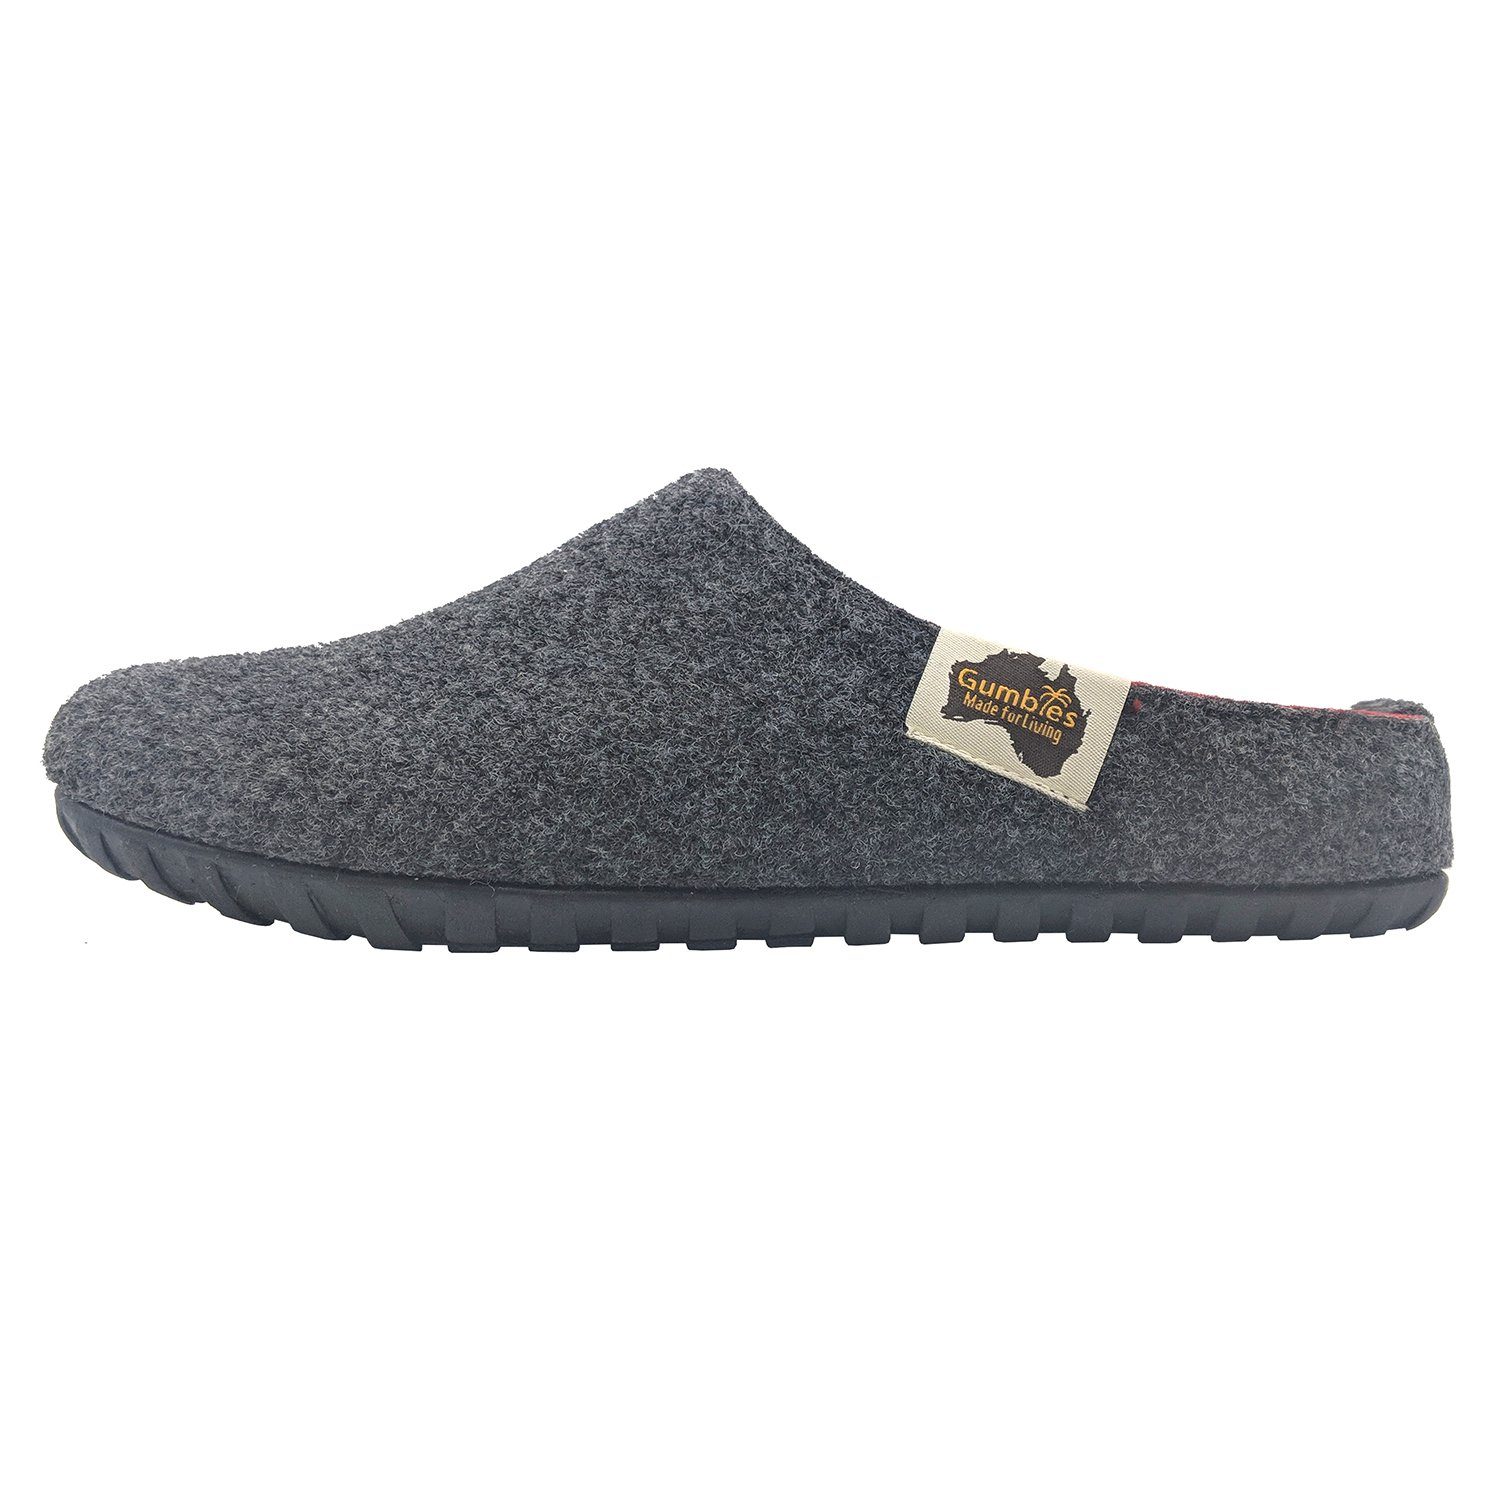 Materialien Red Slipper Charcoal Hausschuh Outback in Gumbies »in farbenfrohen Designs« aus recycelten charcoal-Red